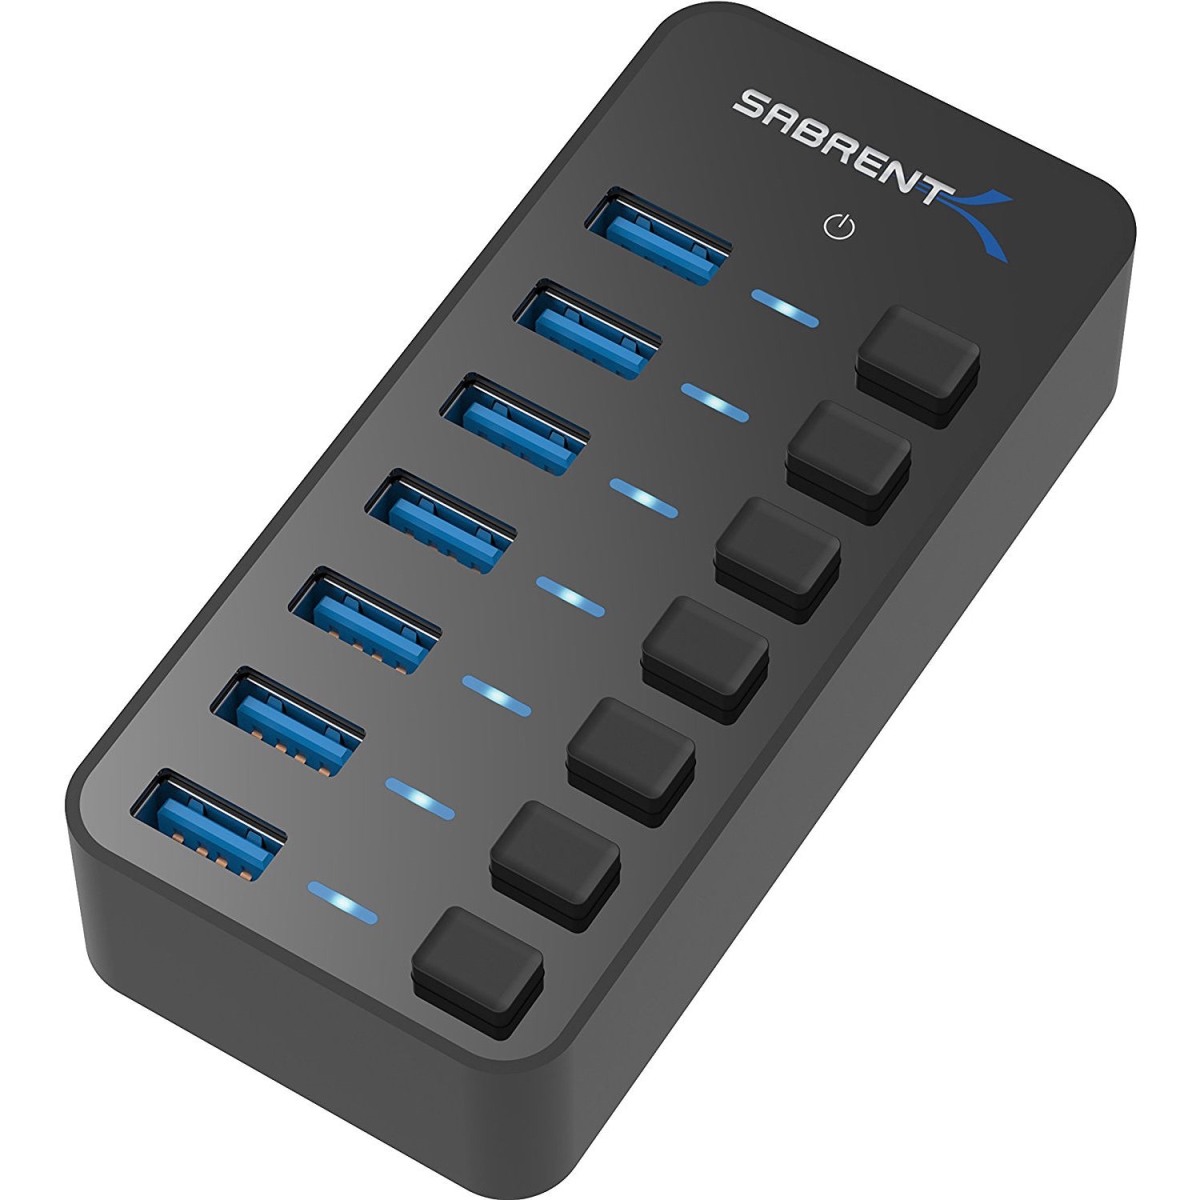 Sabrent HB-BUP7 Individual Power Switches & LEDs 7-Port USB 3.0 Hub